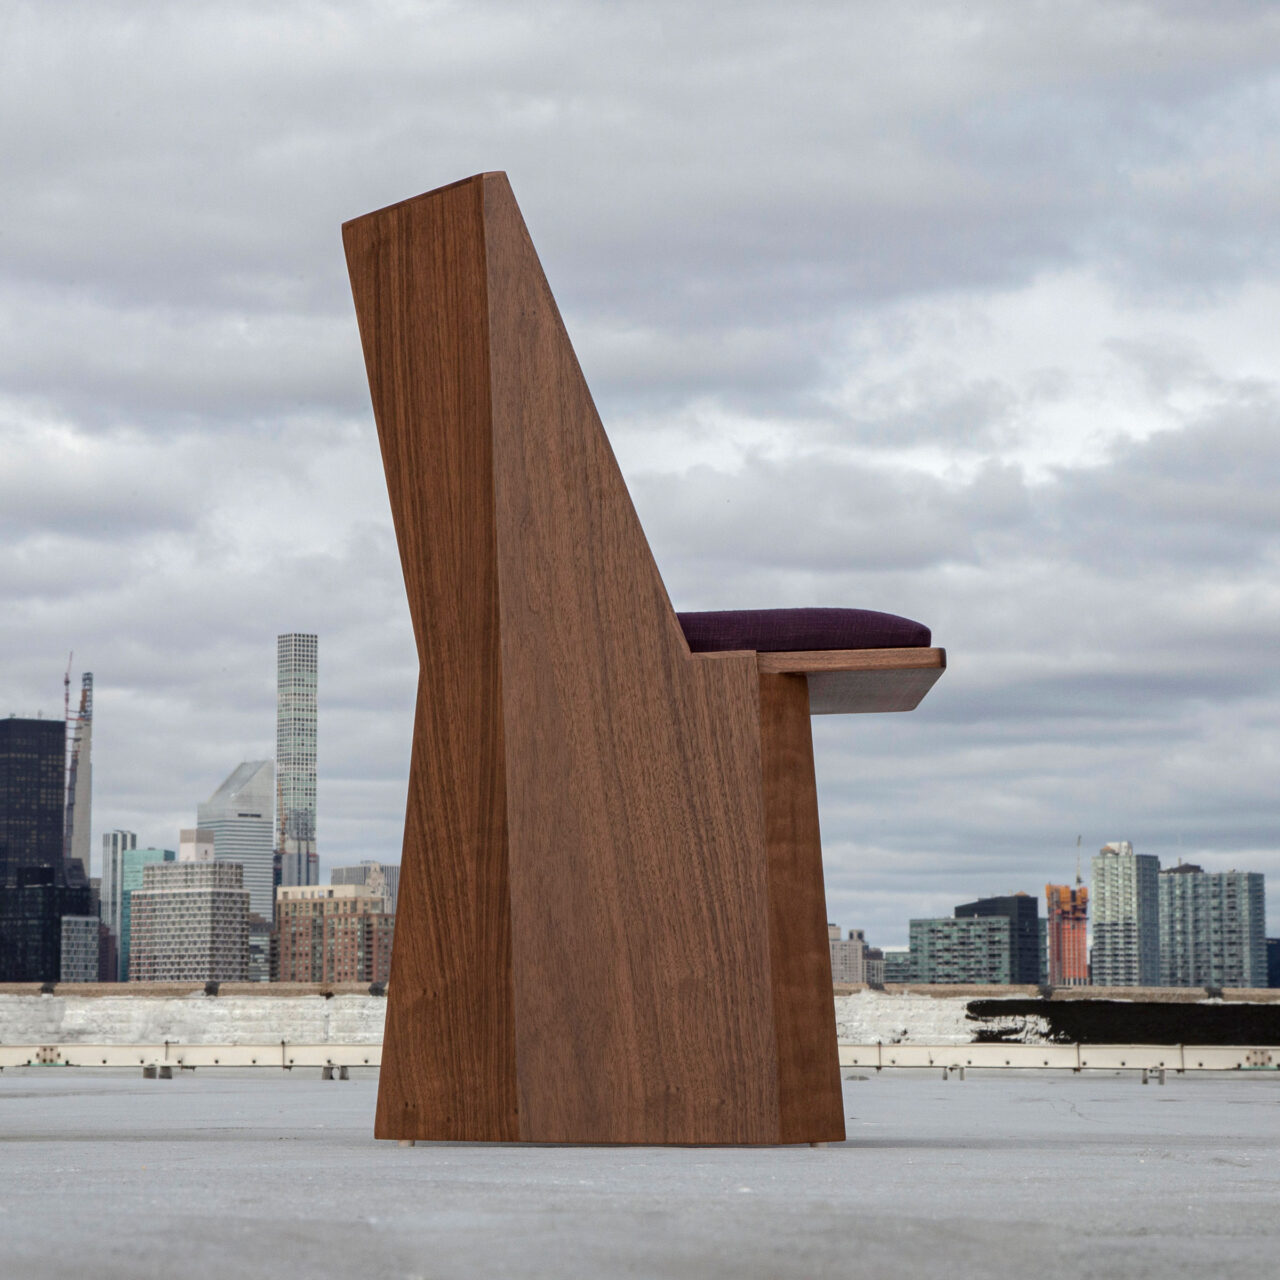 Striking model of unique dining chairs, the 'Symphony Chair' by SENTIENT Furniture, an innovative wooden chair with a tall, angular backrest and a deep purple cushion, overlooking a city skyline.